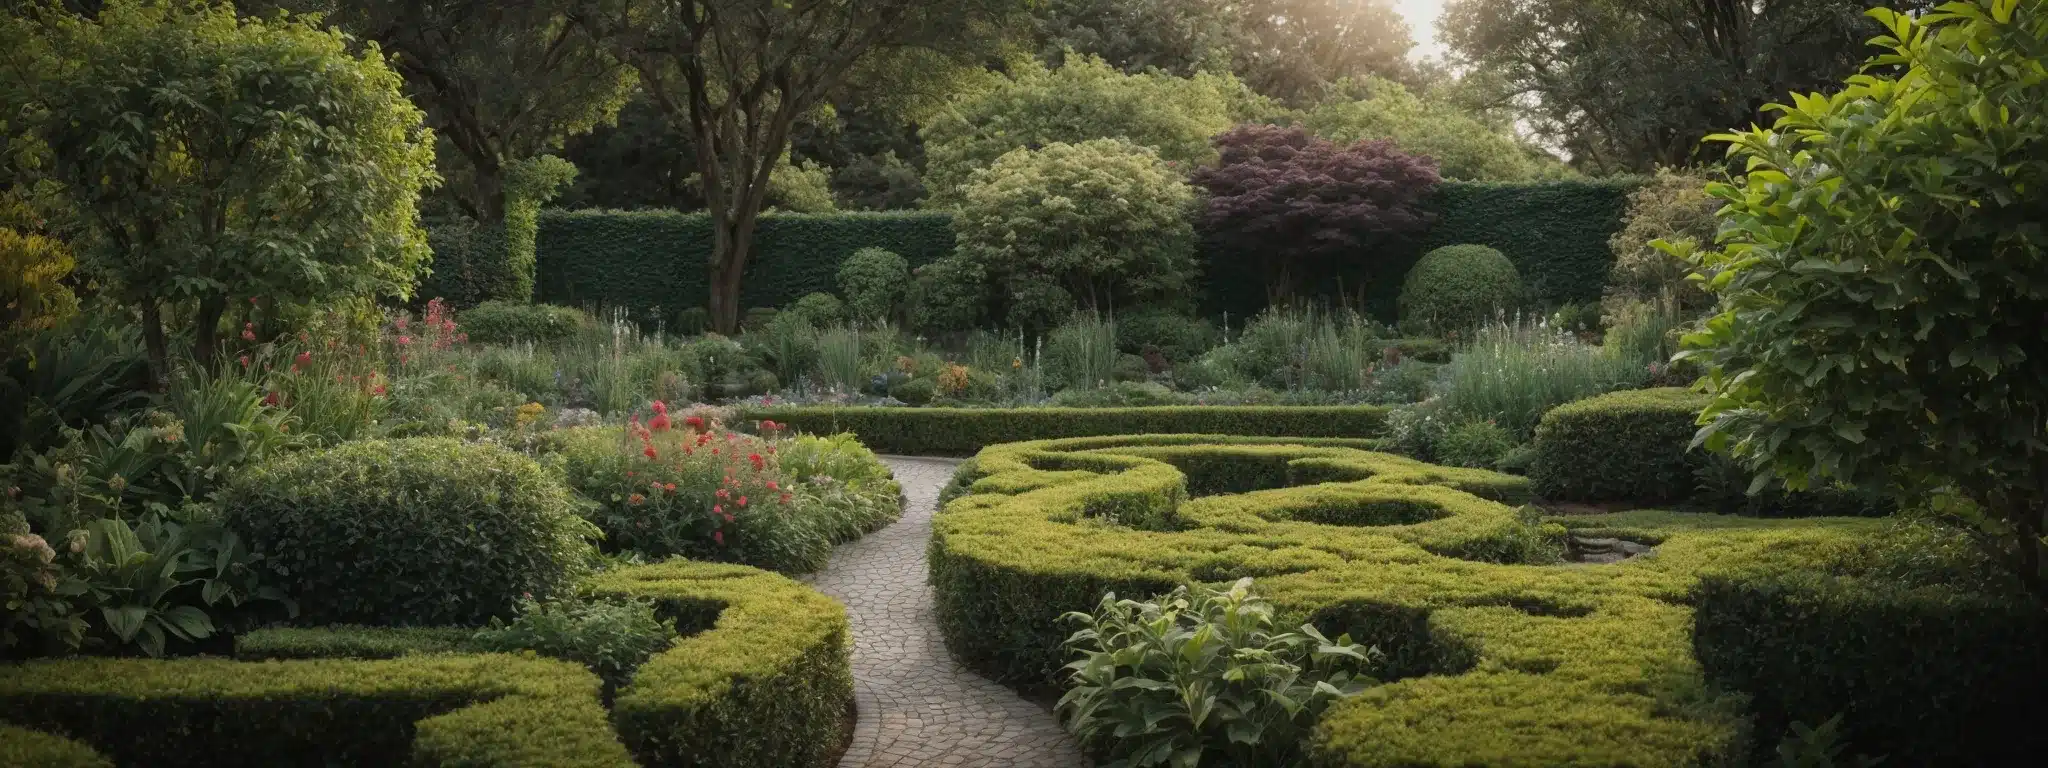 A Harmonious Garden With Well-Tended Paths And A Variety Of Flourishing Plants, Symbolizing Strategic Growth And Nurturing Customer Relationships.